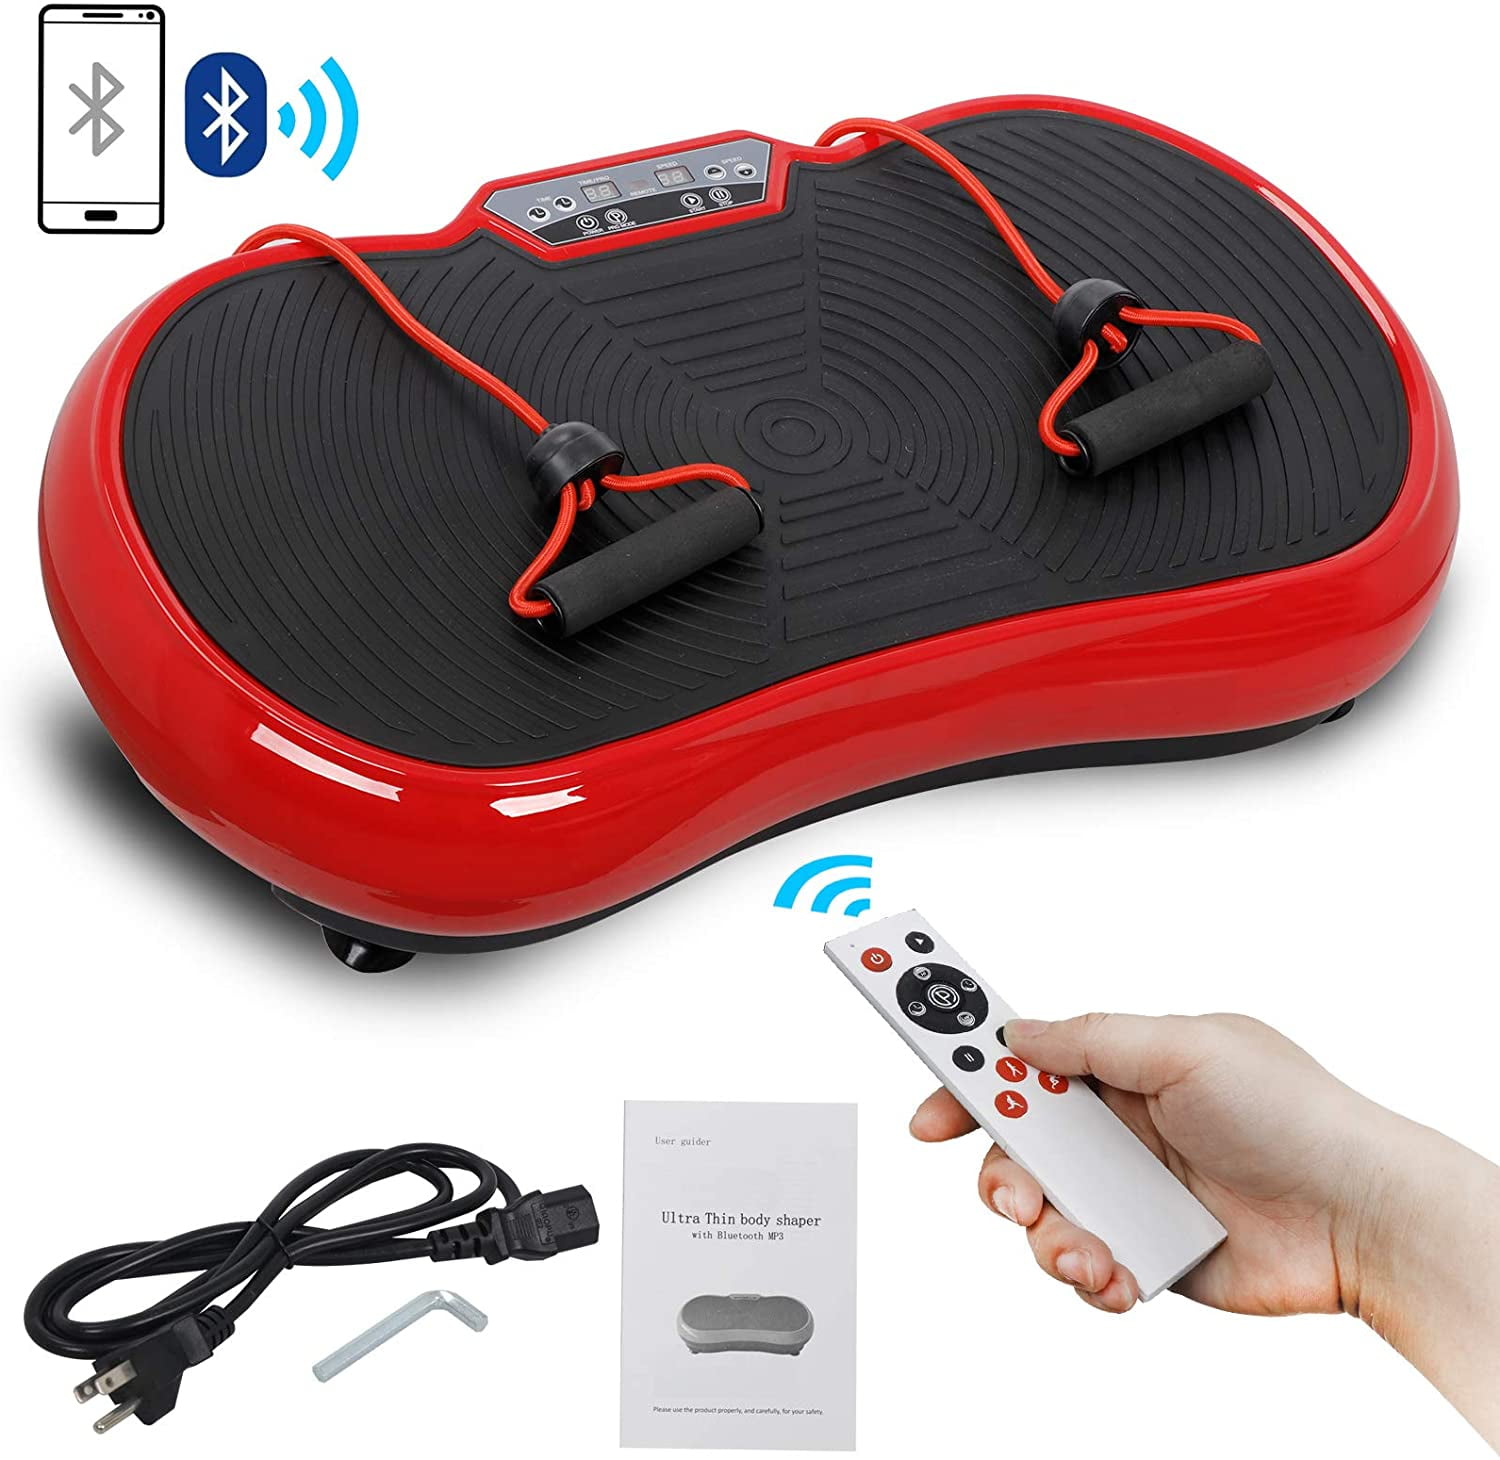 Details about   US Vibration Platform Plate Whole Body Exercise Fitness Massager Machine w/Band 